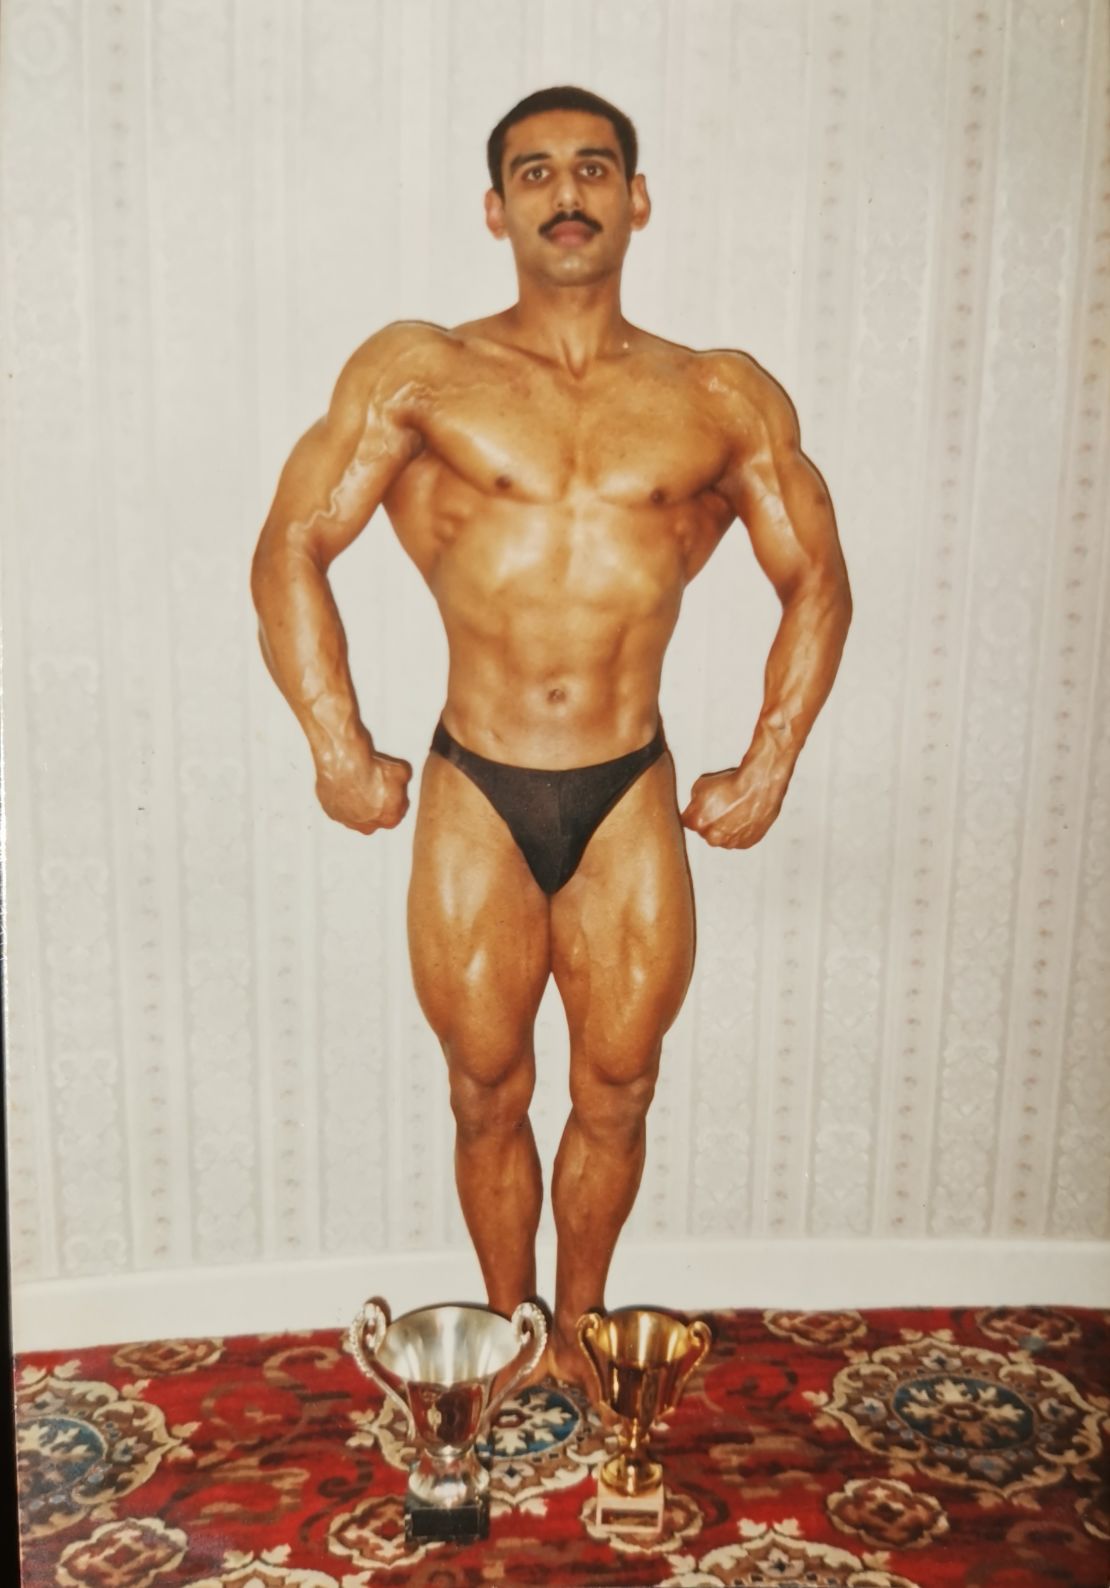 Bains' father, Kuldip Singh Bains, is a former bodybuilder and powerlifter. 